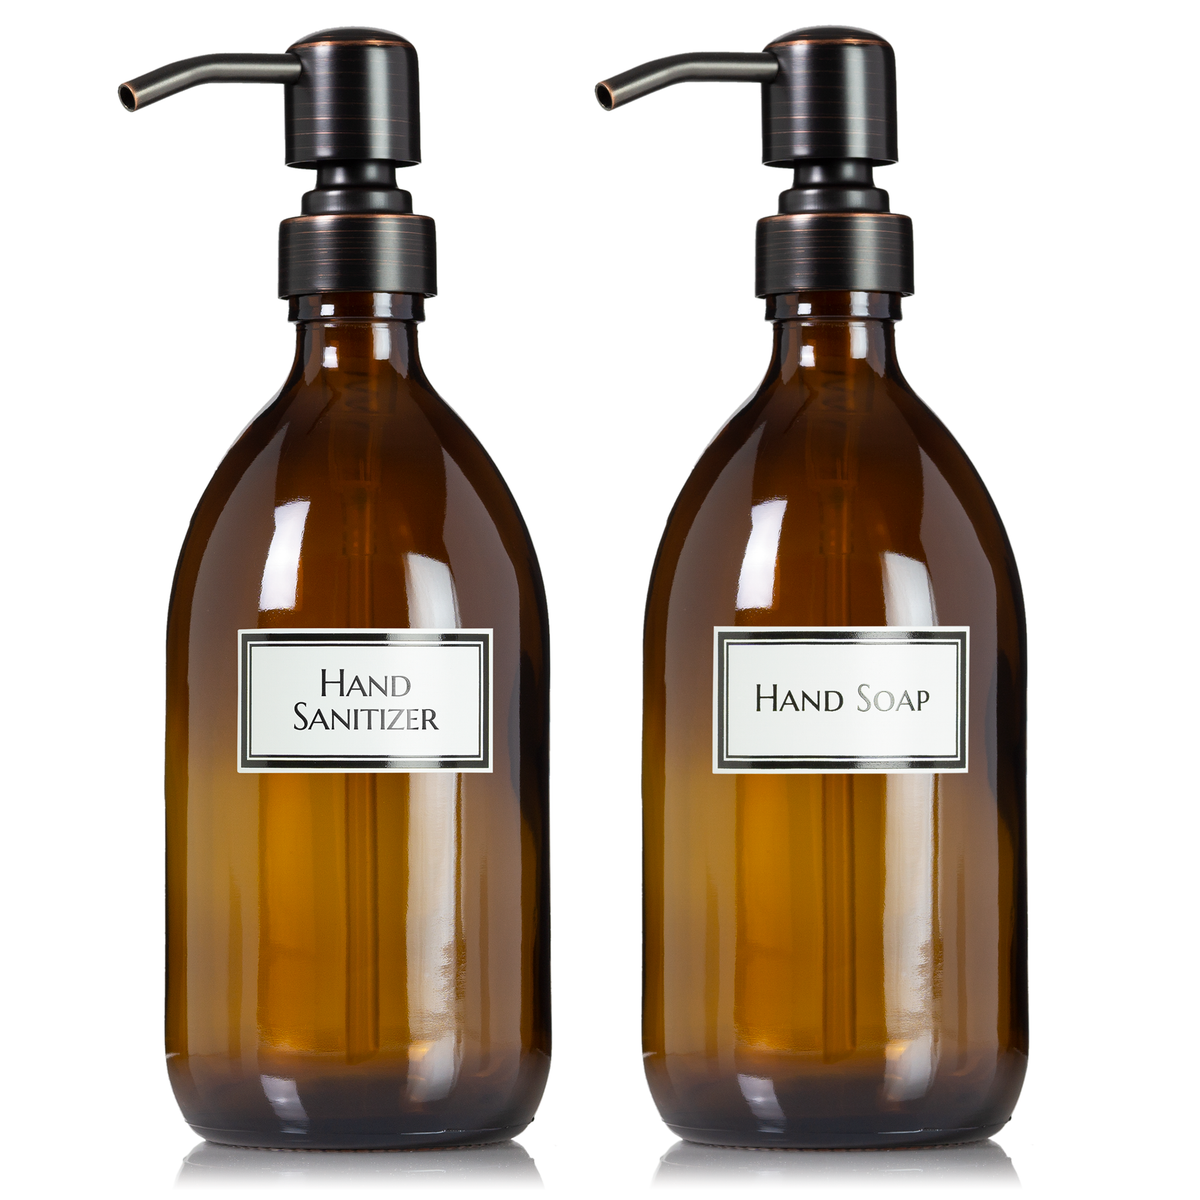 2 Amber Glass 16 oz Apothecary Soap Dispenser Pump Bottles with Ceramic Printed Labels